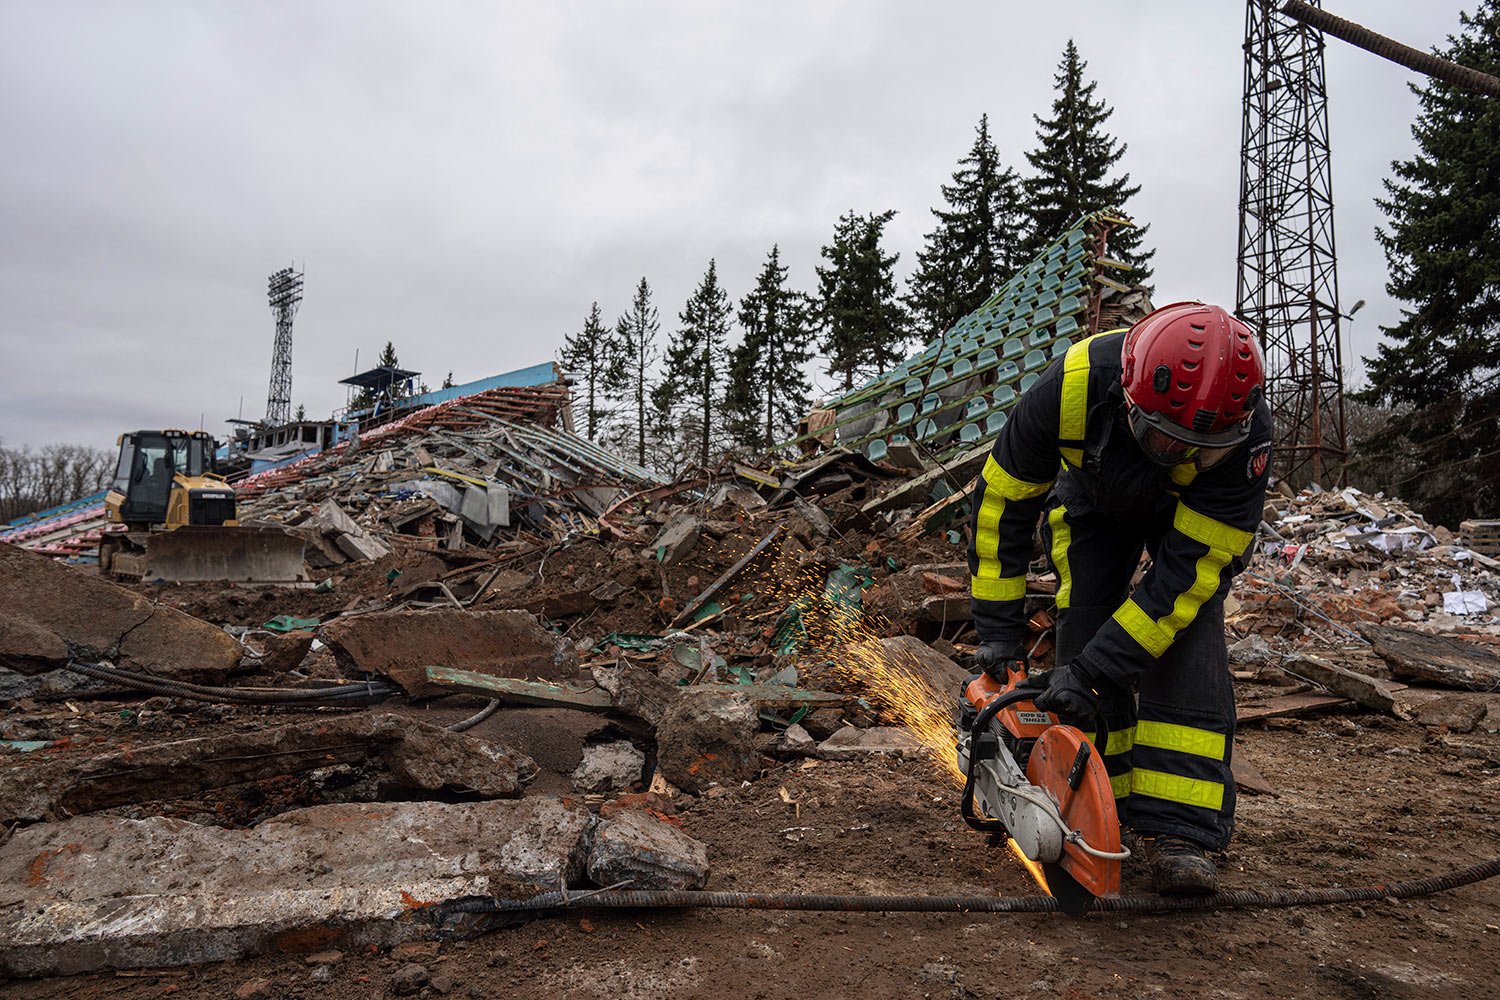  A firefighter works at a central stadium damaged by Russian forces' shelling in Chernihiv, Ukraine, Wednesday, April 13, 2022. (AP Photo/Evgeniy Maloletka) 